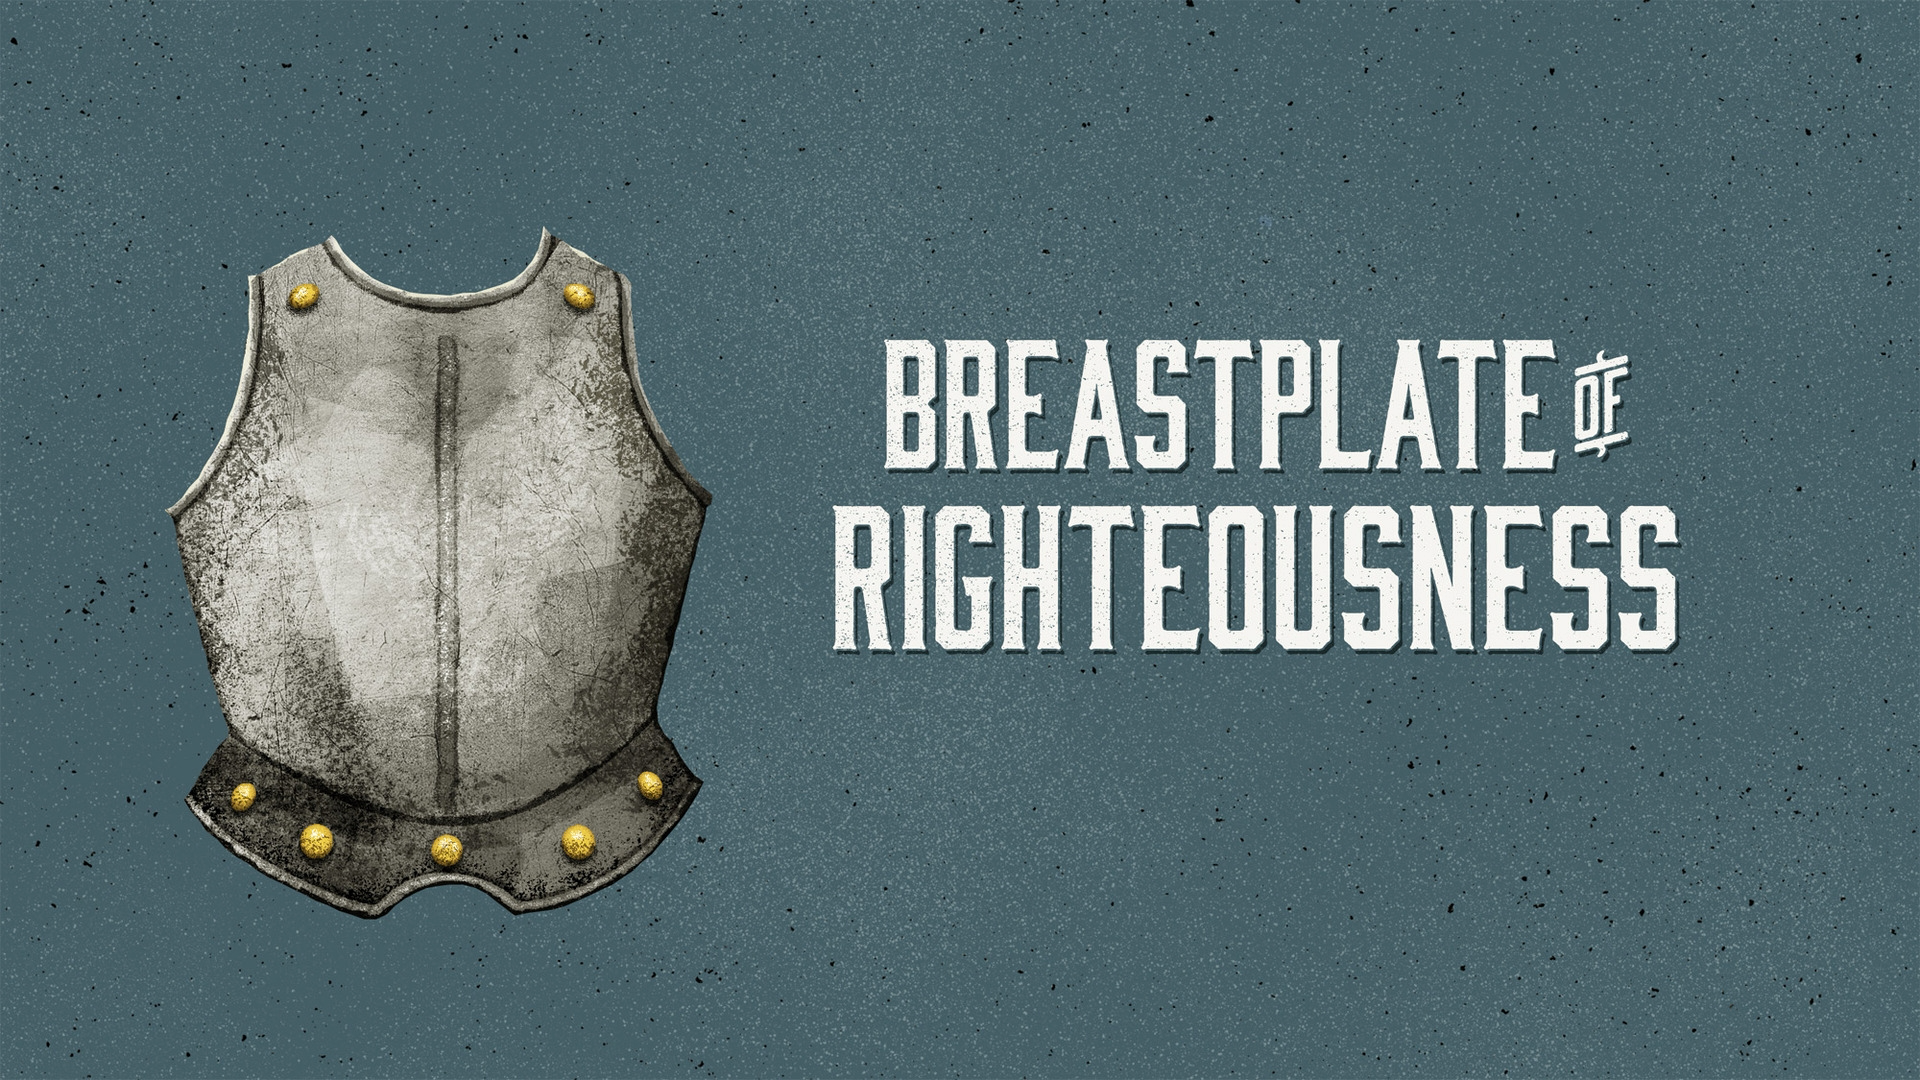 0 - 21.11.7p - Ephesians 6.14 - Breastplate of Righteousness - Title.png